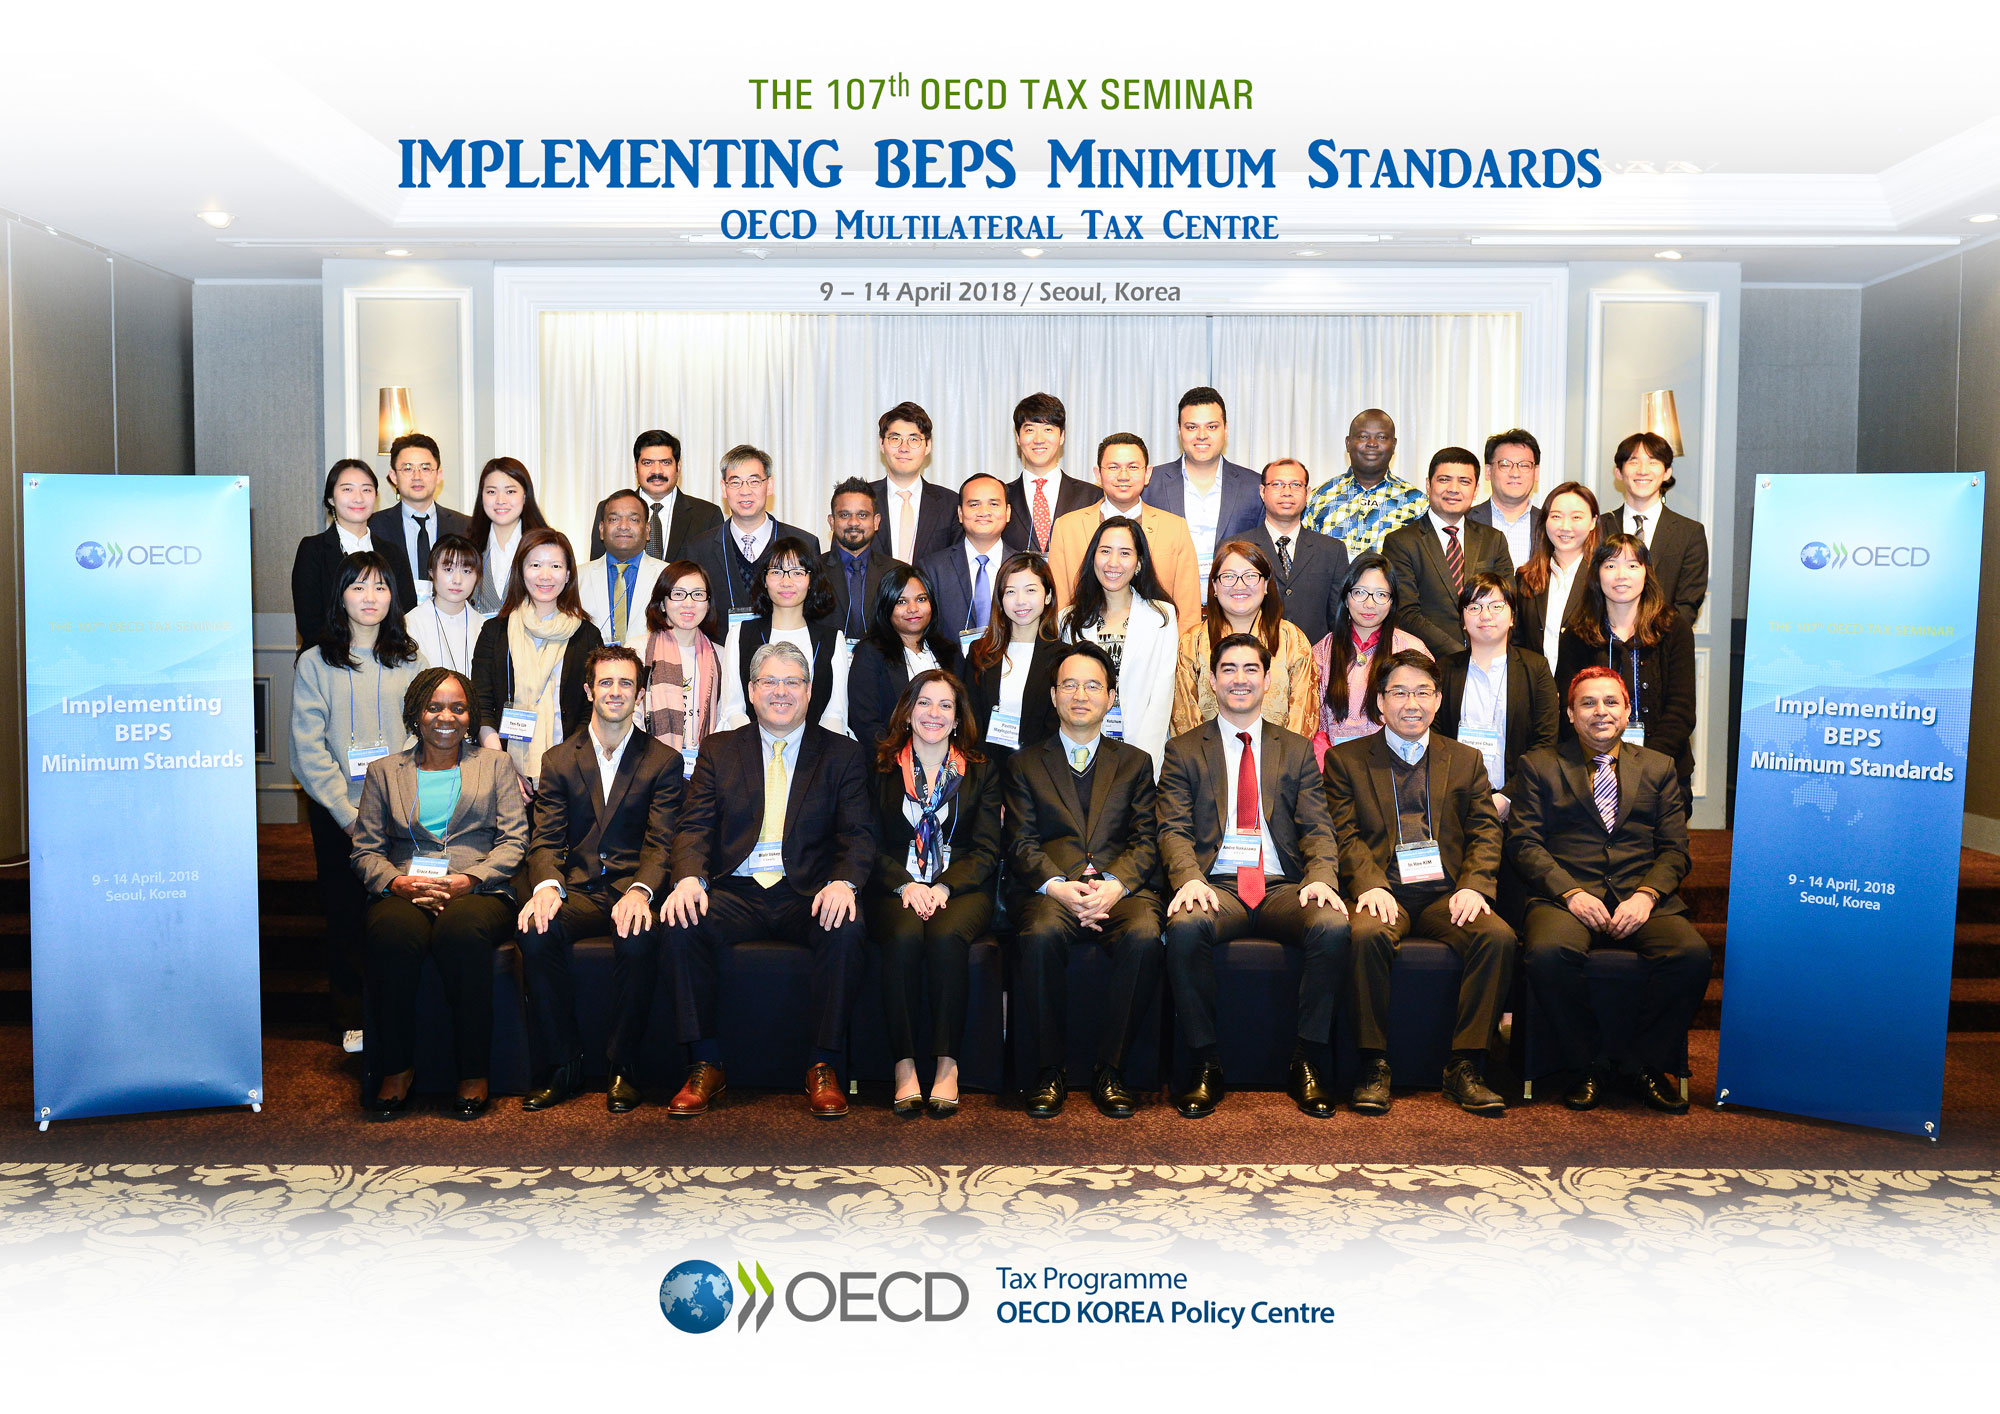 The 107th OECD Tax Seminar on Implementing BEPS: Minimum Standards